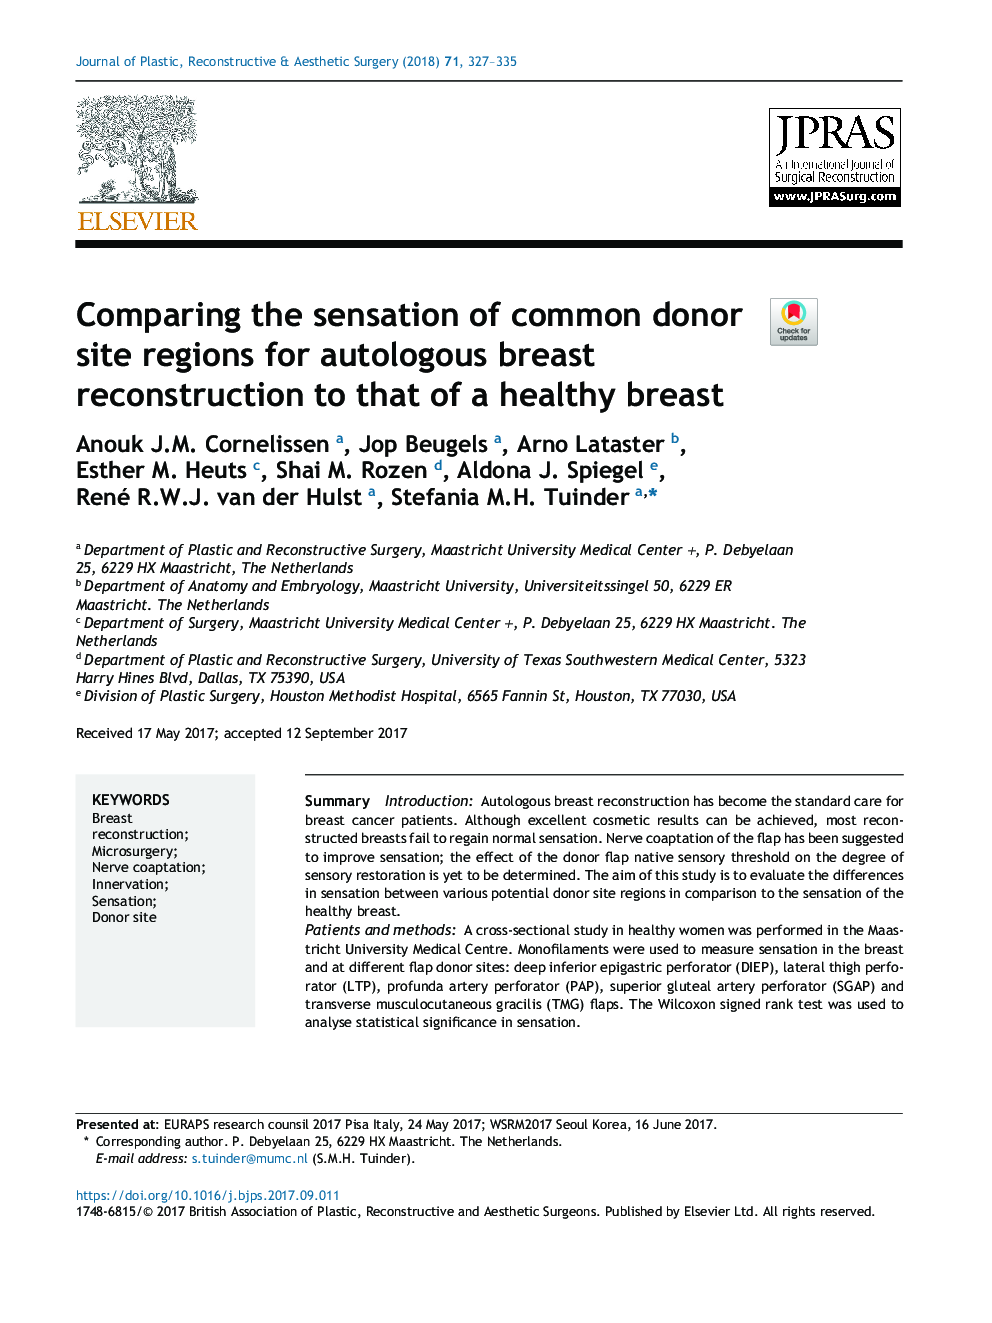 Comparing the sensation of common donor site regions for autologous breast reconstruction to that of a healthy breast